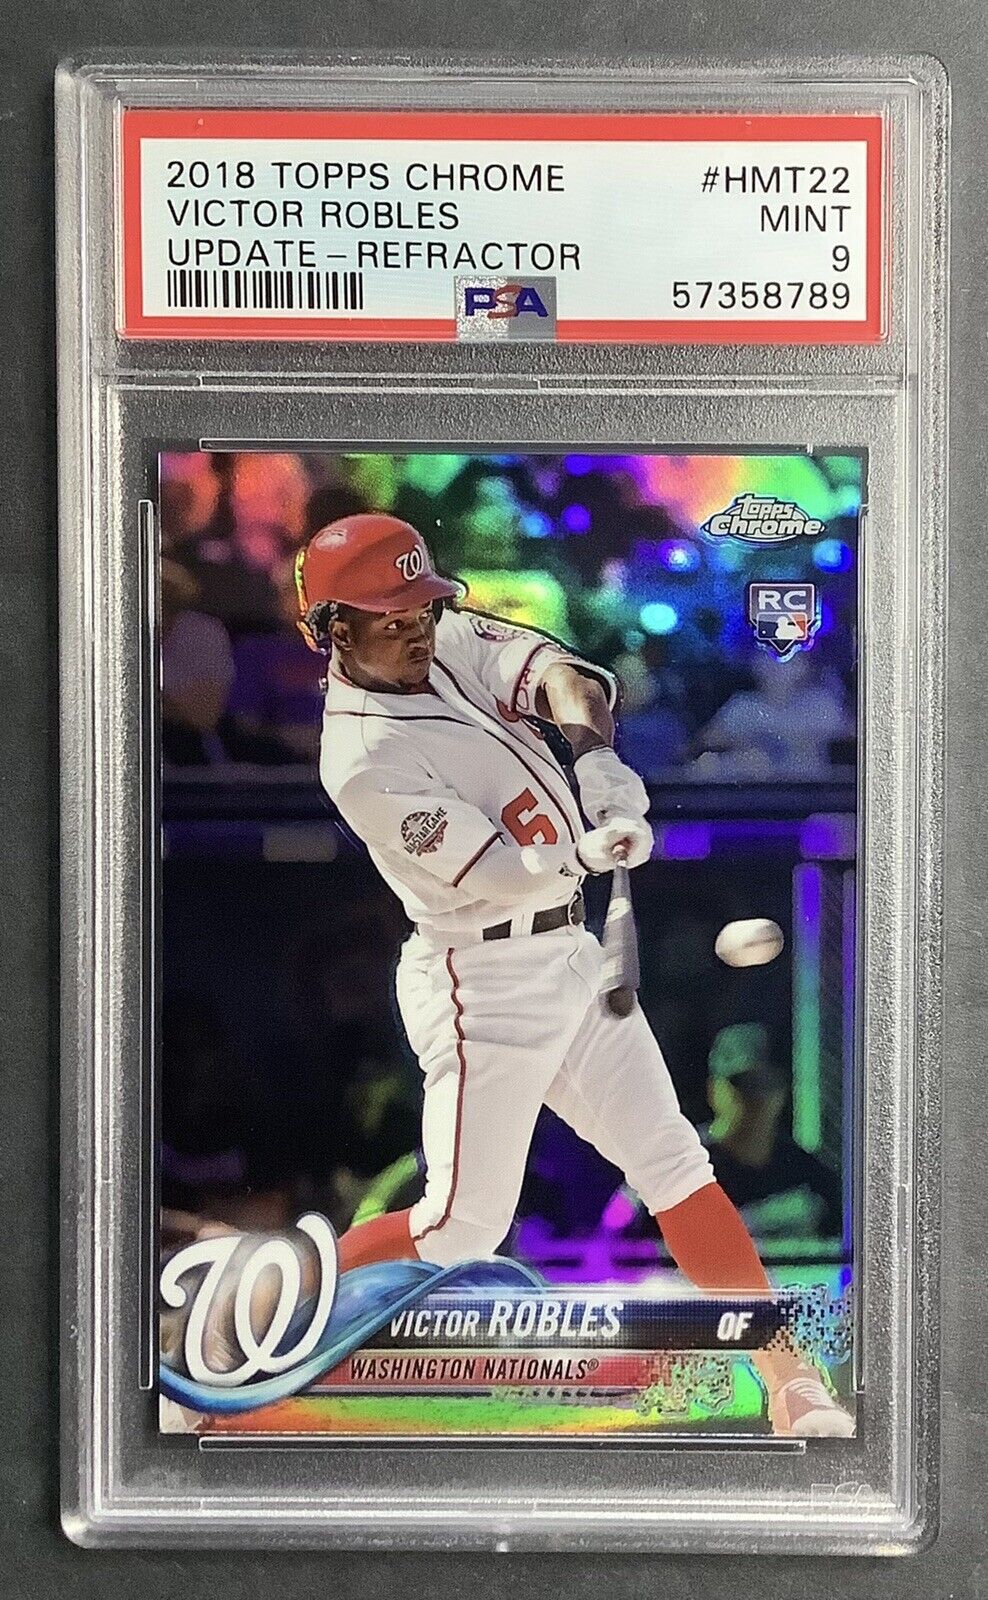 2018 topps chrome update #hmt22 victor robles rc; rookie refractor /250 PSA 9 💥